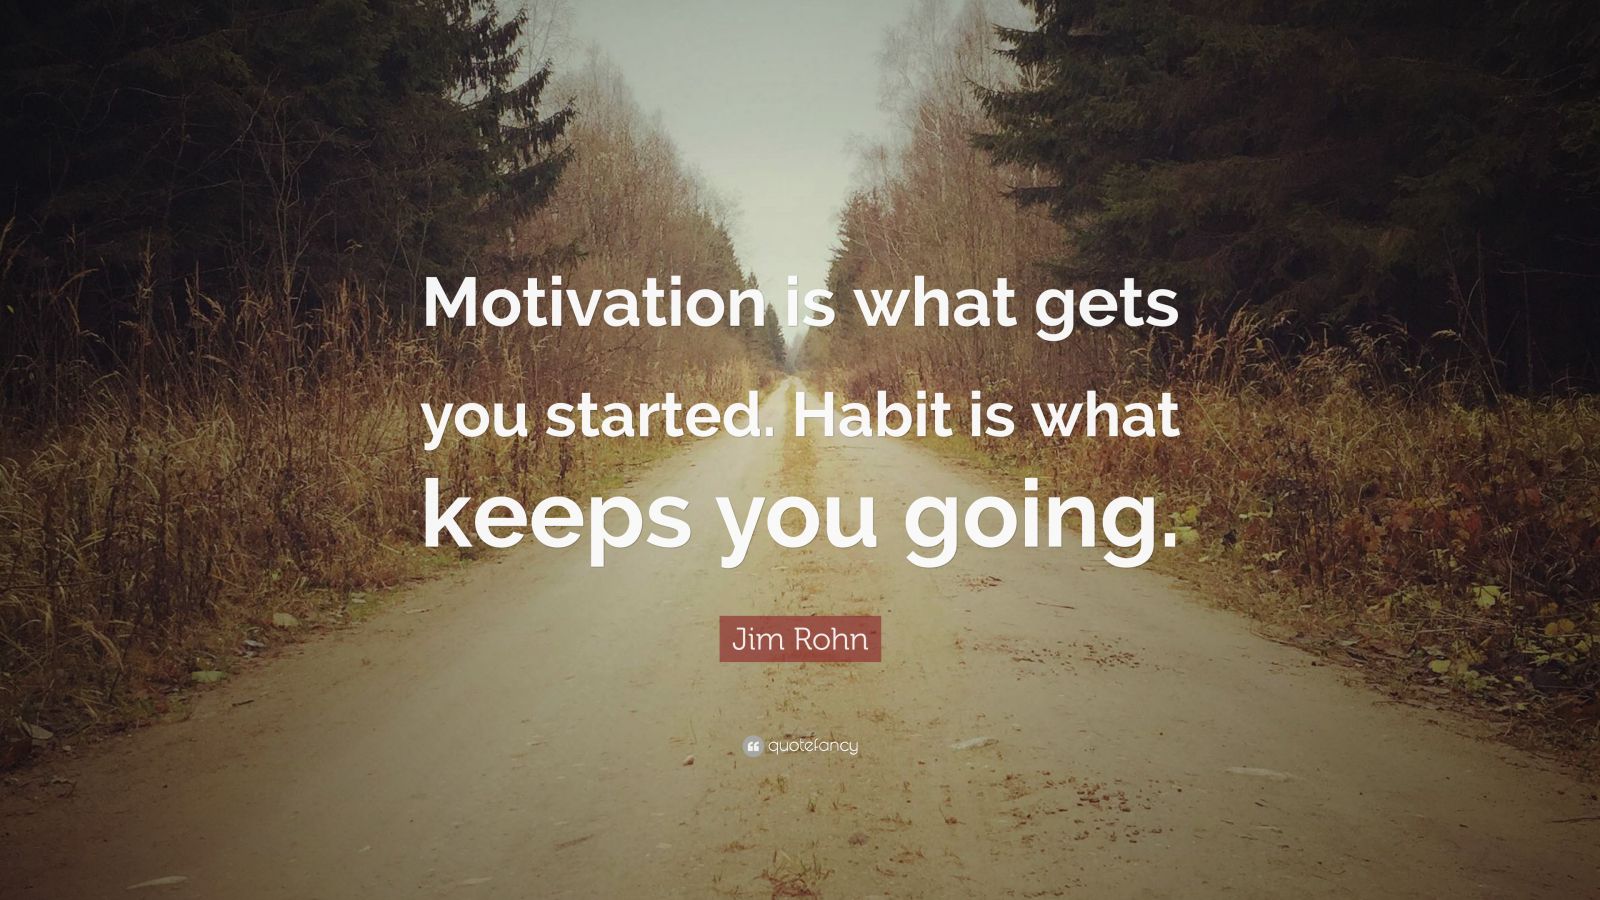 Jim Rohn Quote: “Motivation is what gets you started. Habit is what